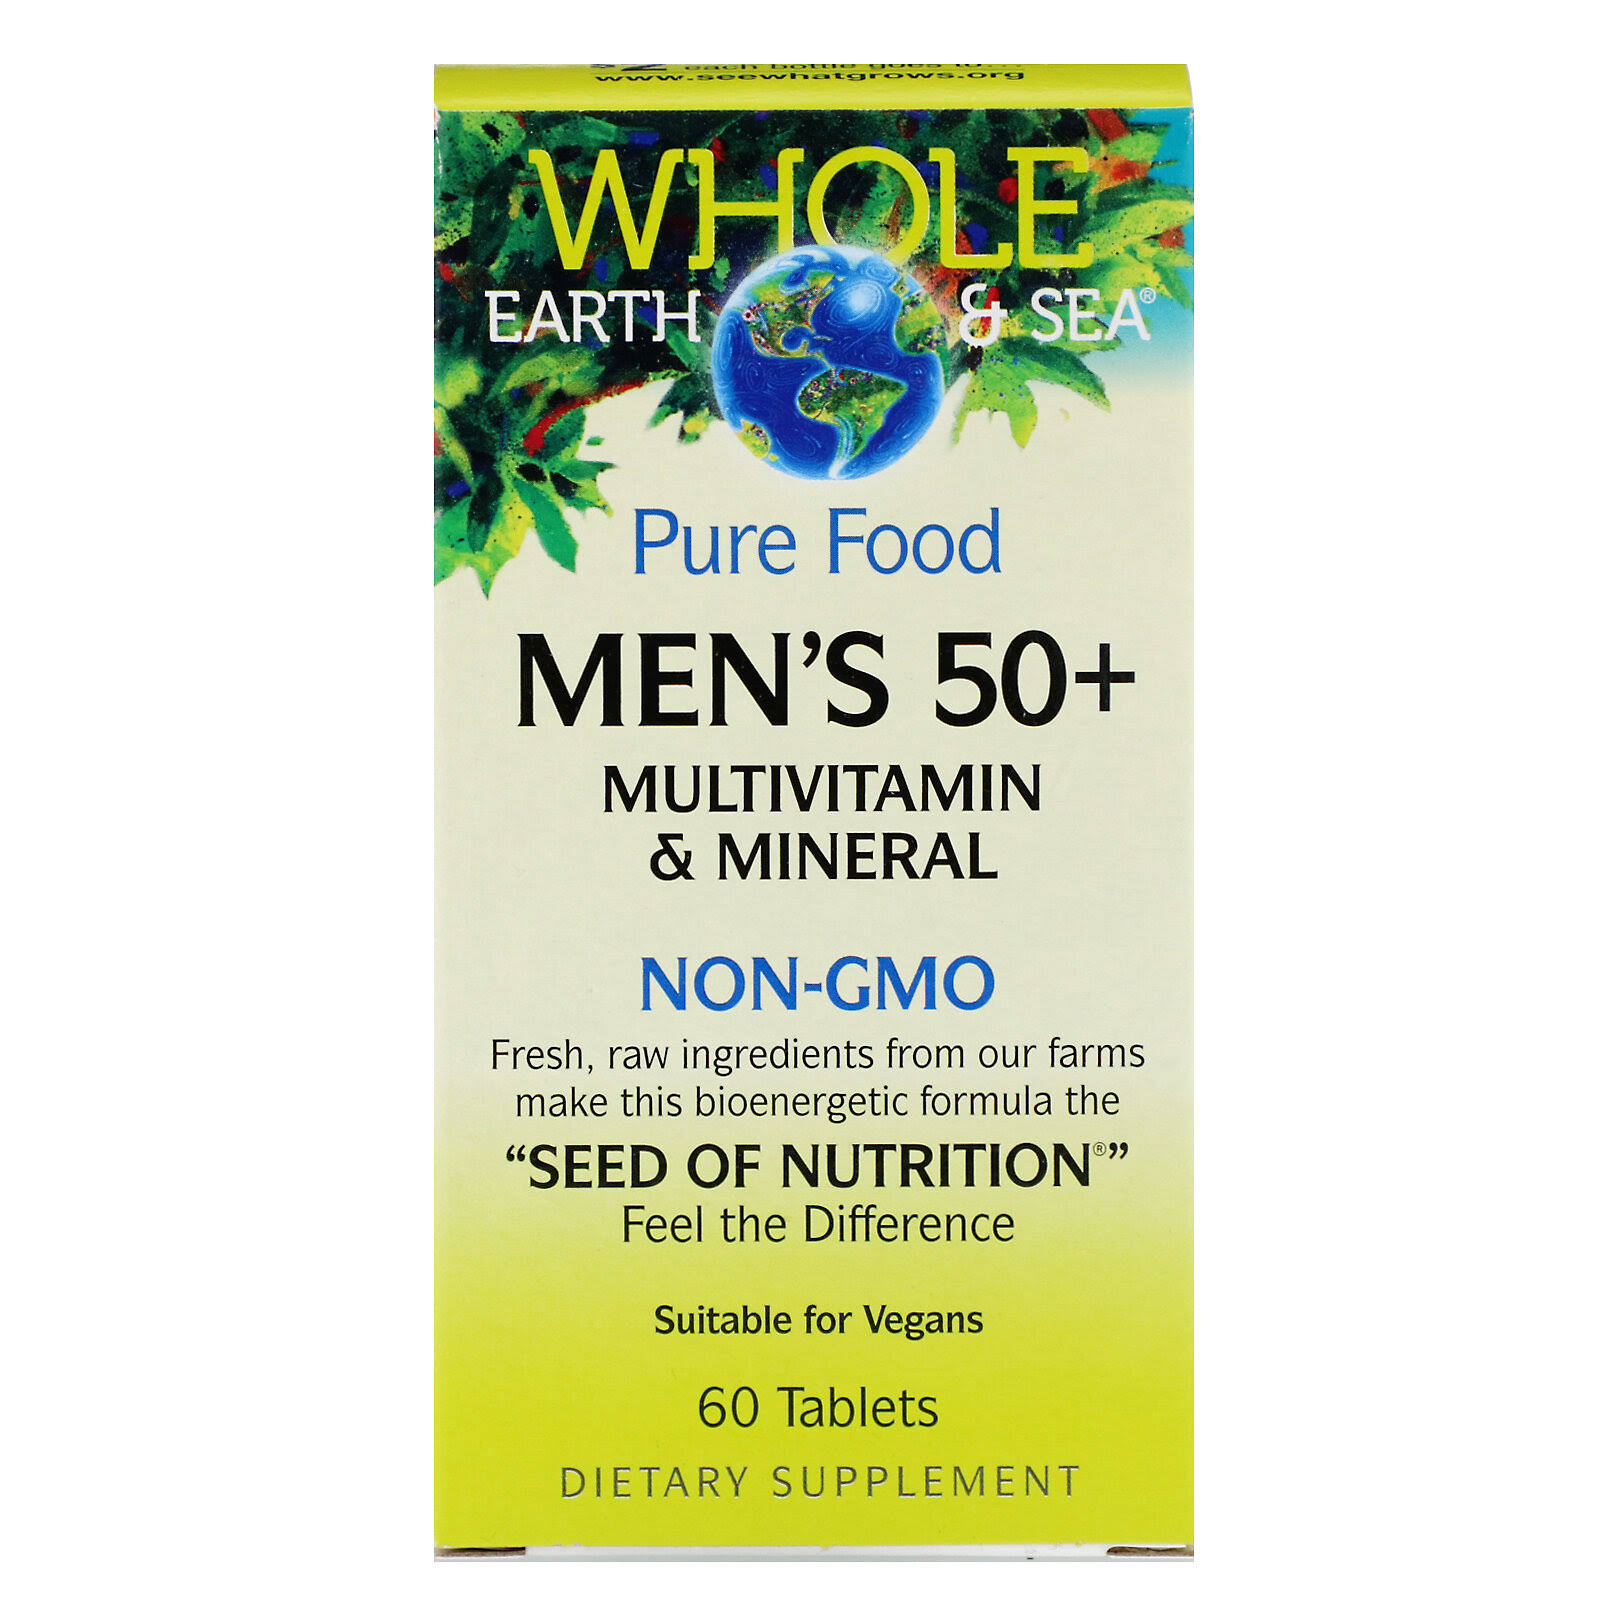 Natural Factors Whole Earth Pure Food Men's 50 Multivitamin & Mineral - 60 Tablets